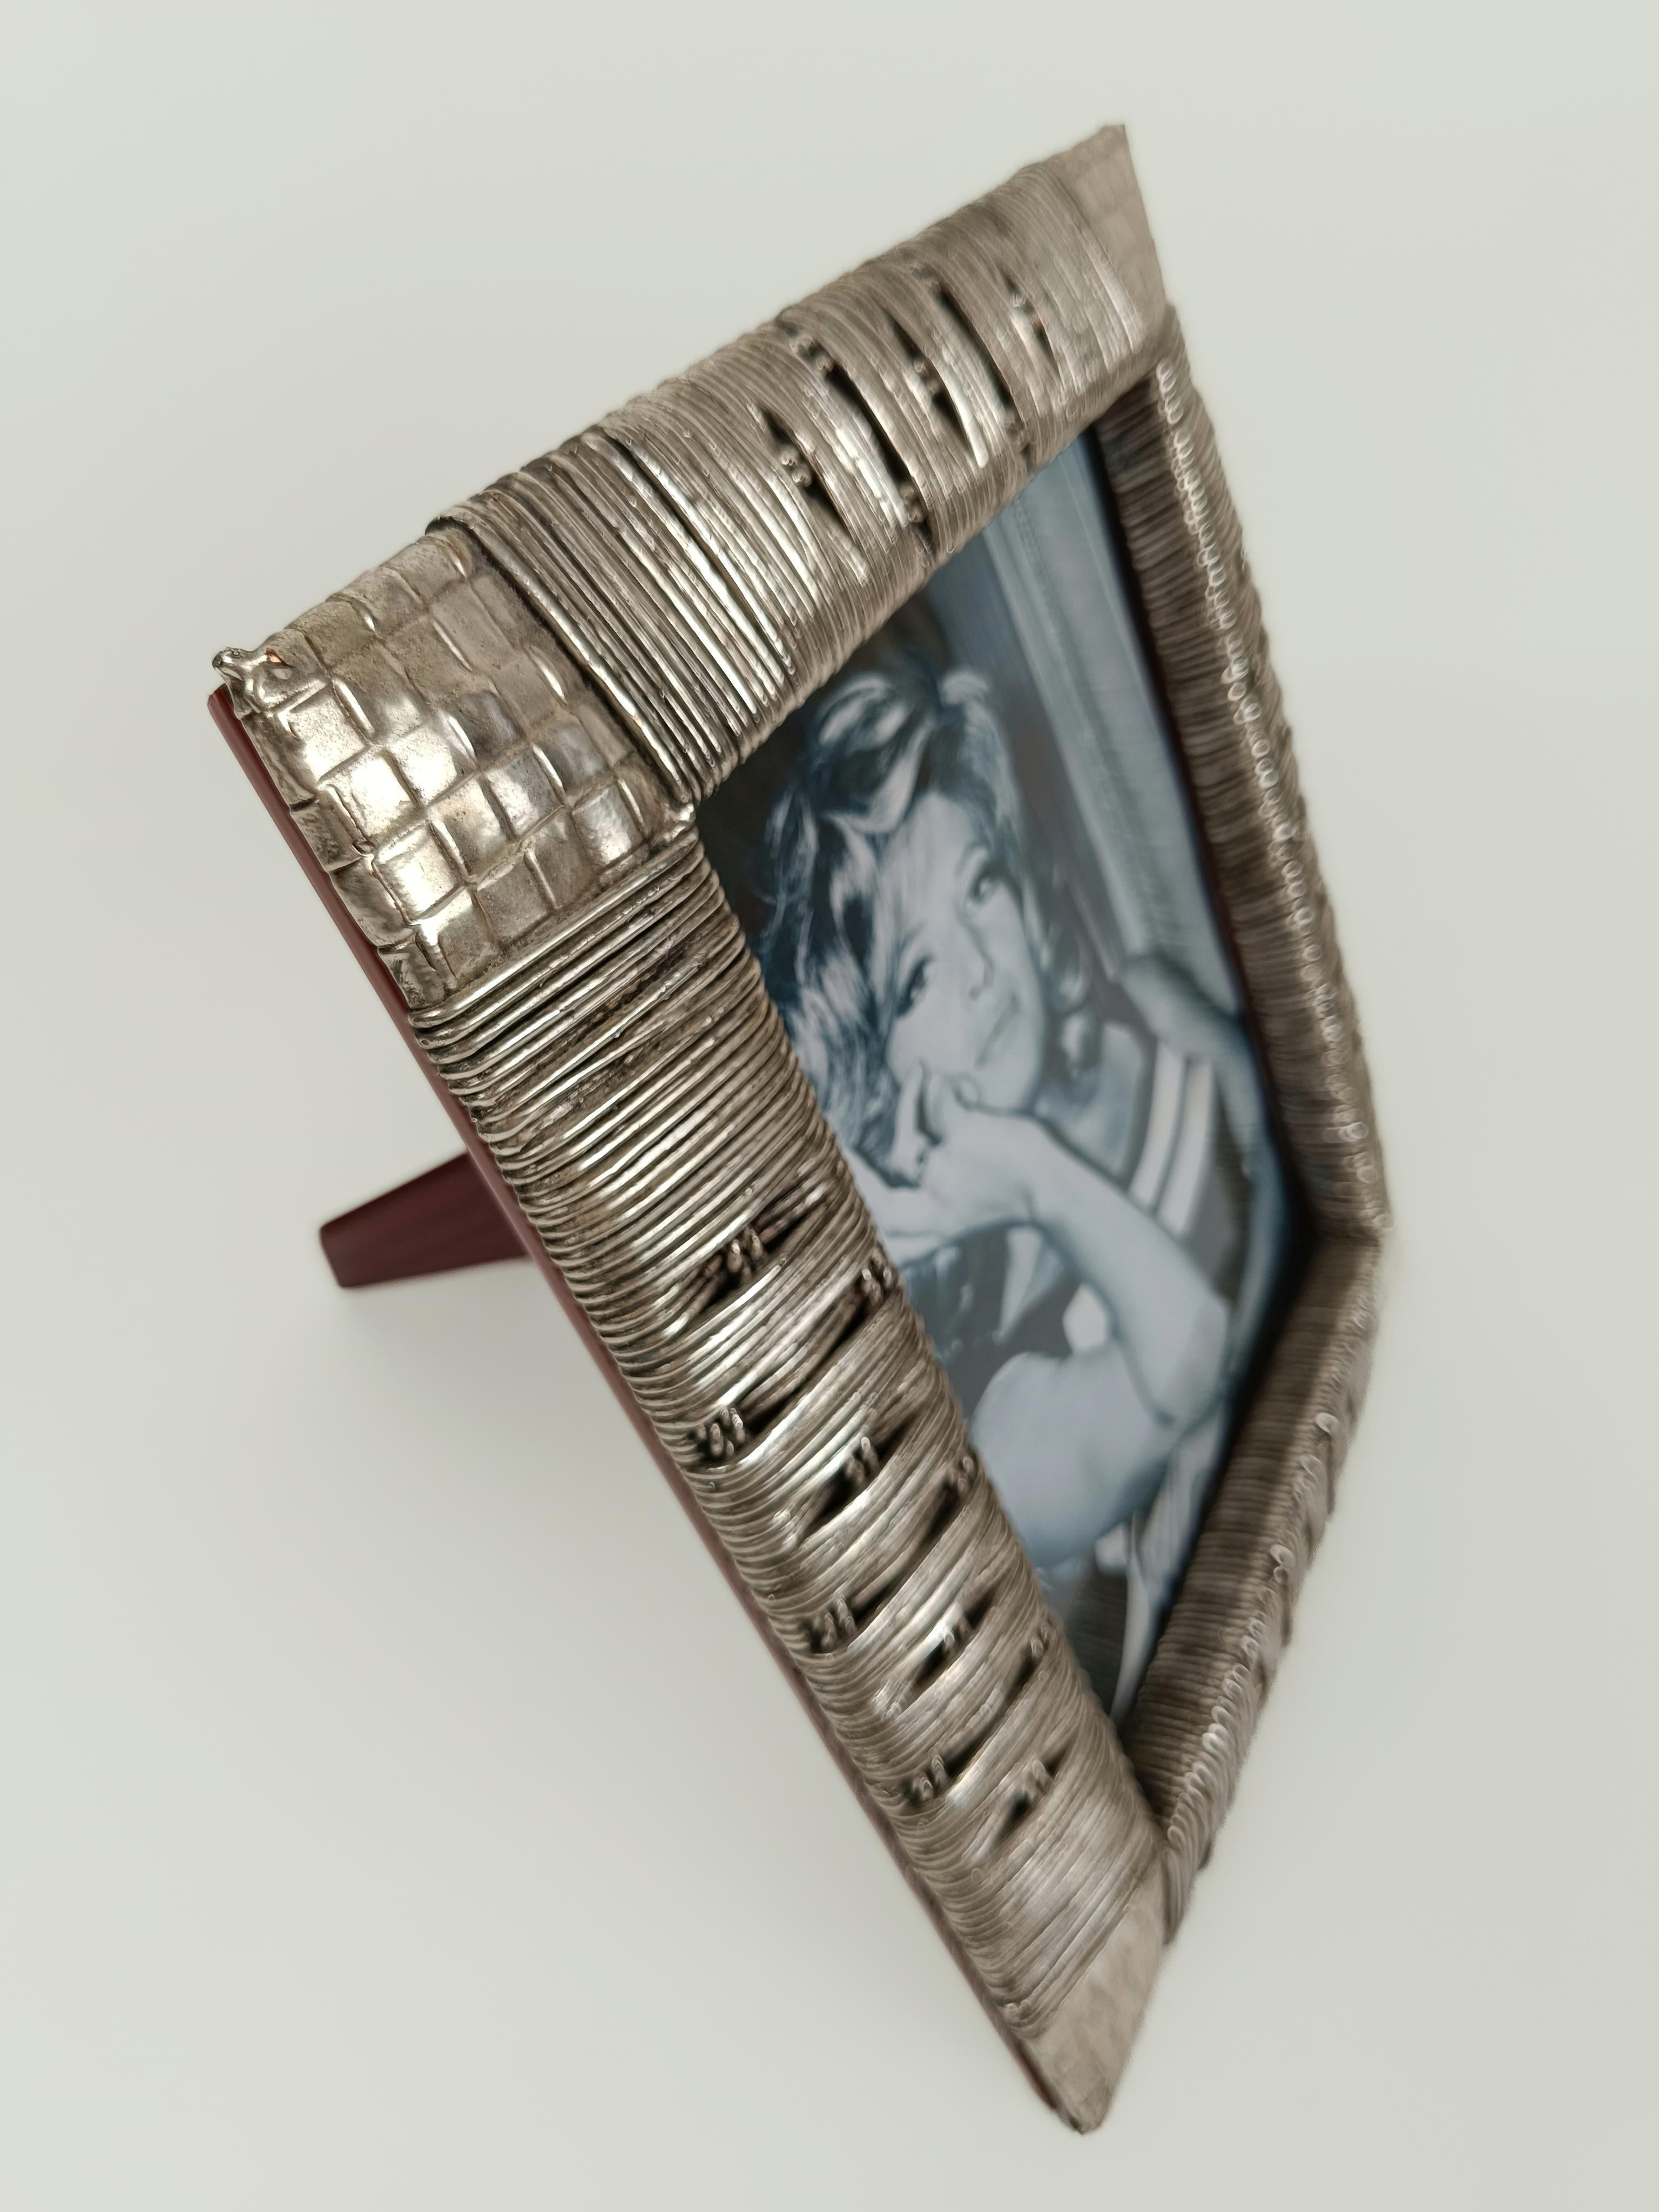 Midcentury Table Picture Frame Made in Silver Plated Woven Wicker, Italy 1970s For Sale 8